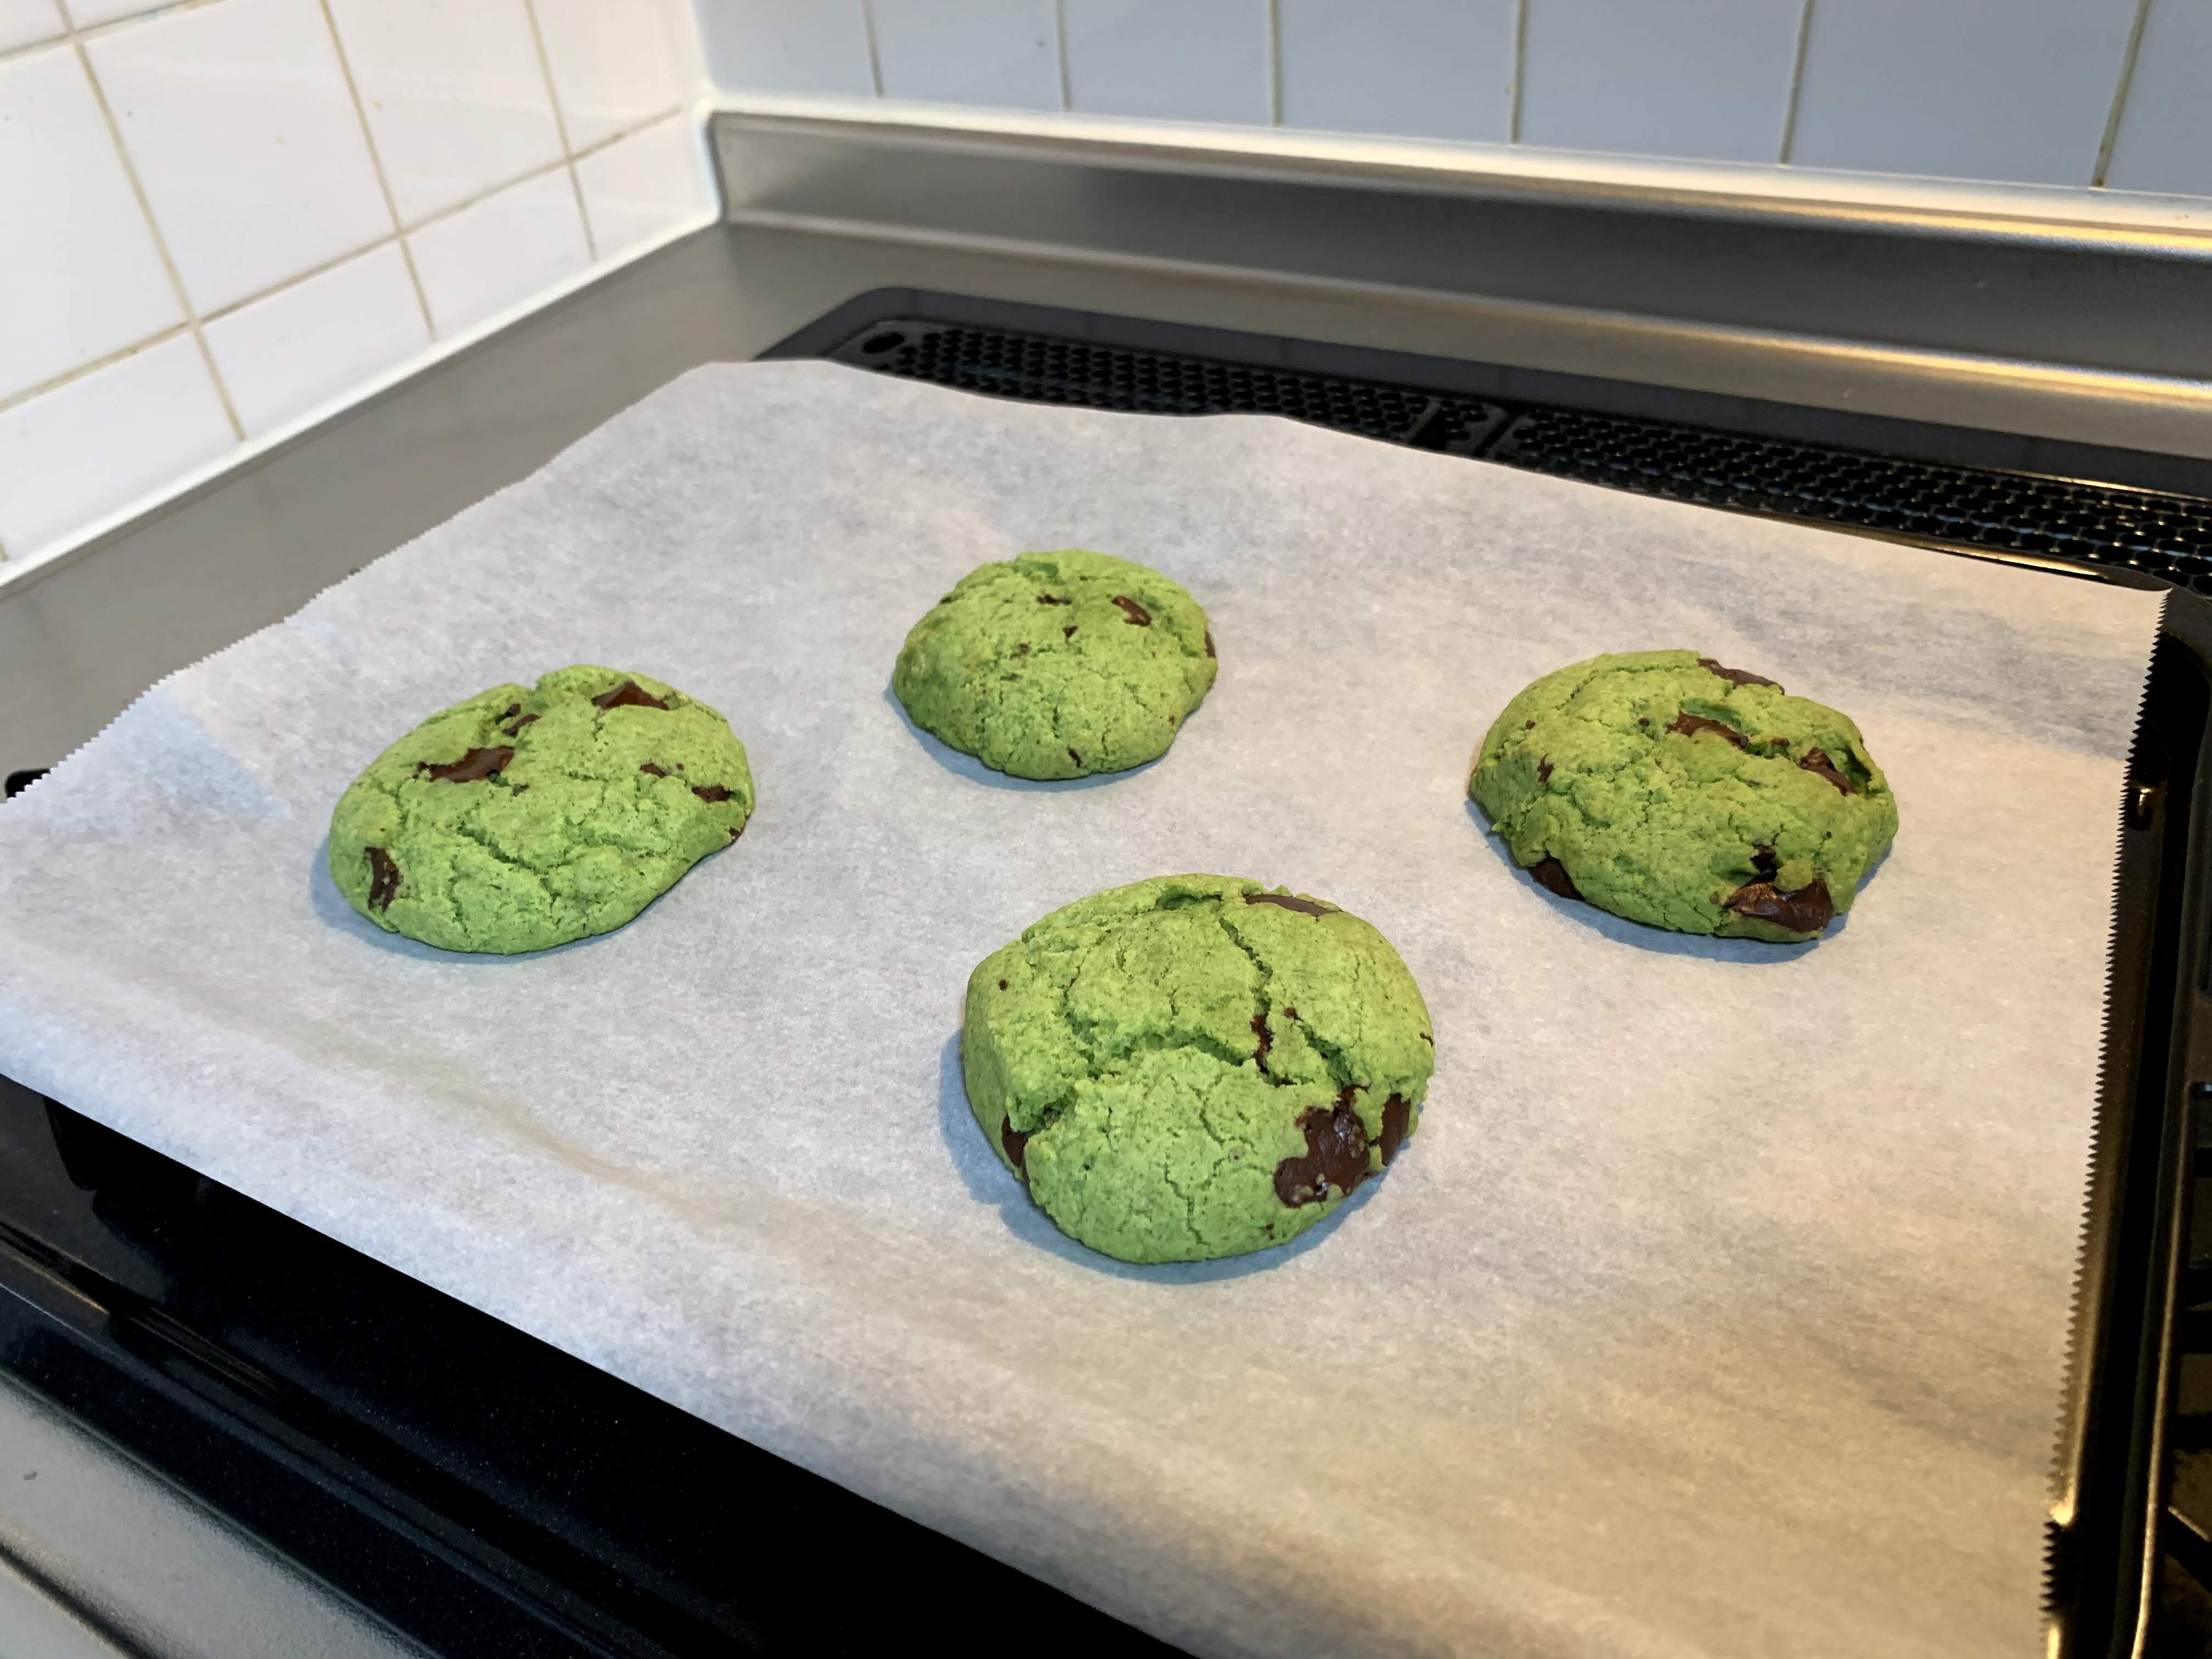 freshly baked green biscuits